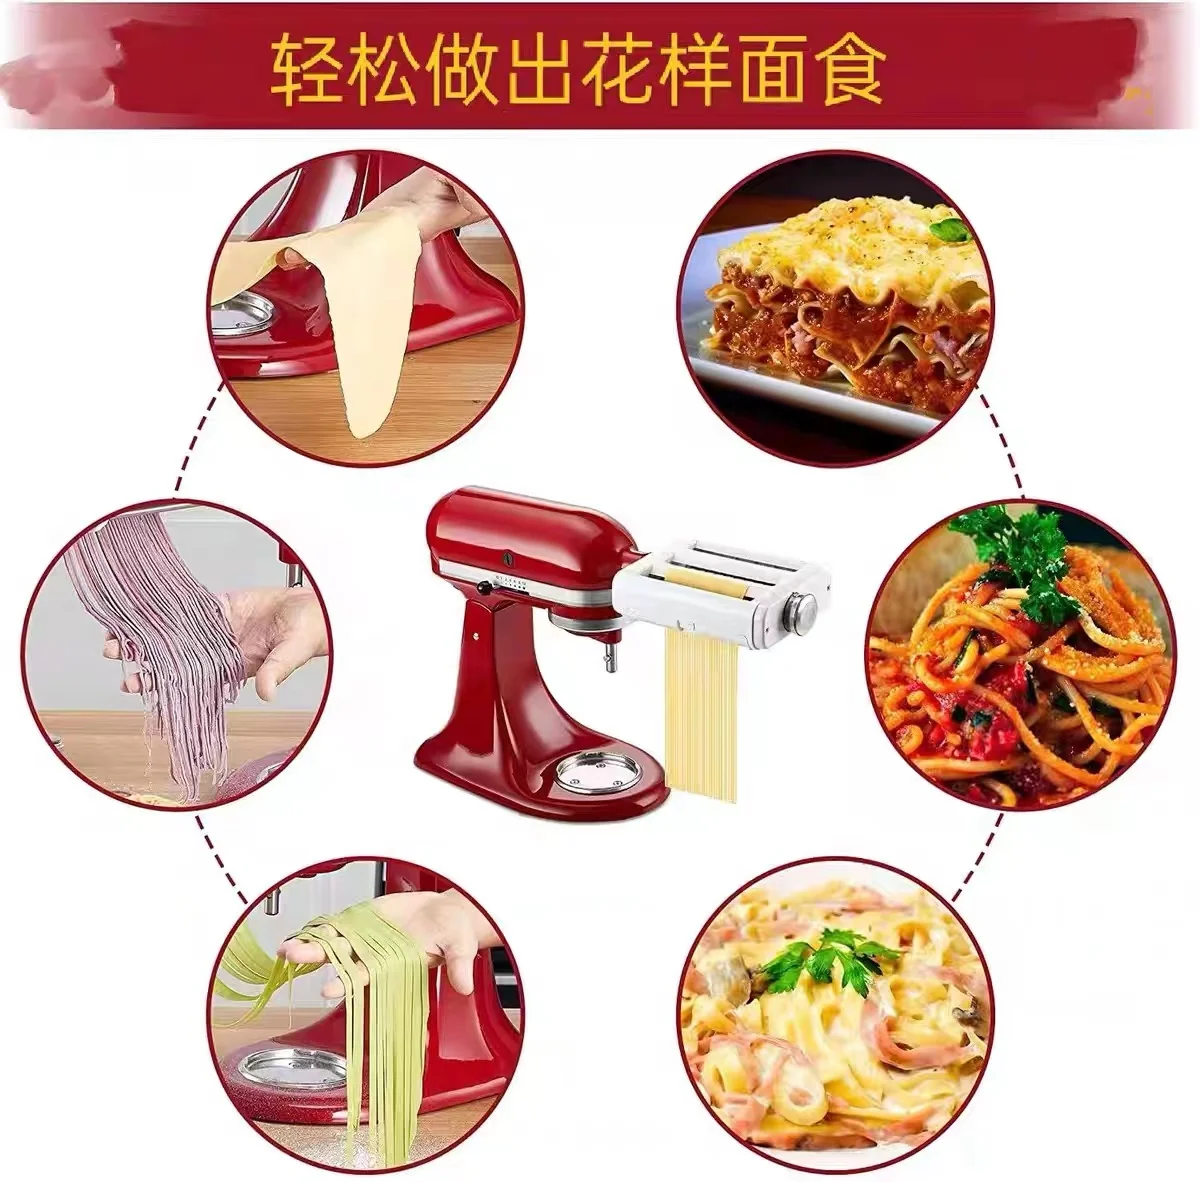 https://ae01.alicdn.com/kf/S1a419e3e419c4aab9036be8f3ab93582b/3-in-1-Stainless-Steel-Pasta-Maker-Attachment-for-Kitchenaid-Stand-Mixers-Pasta-Sheet-Roller-Spaghetti.jpg